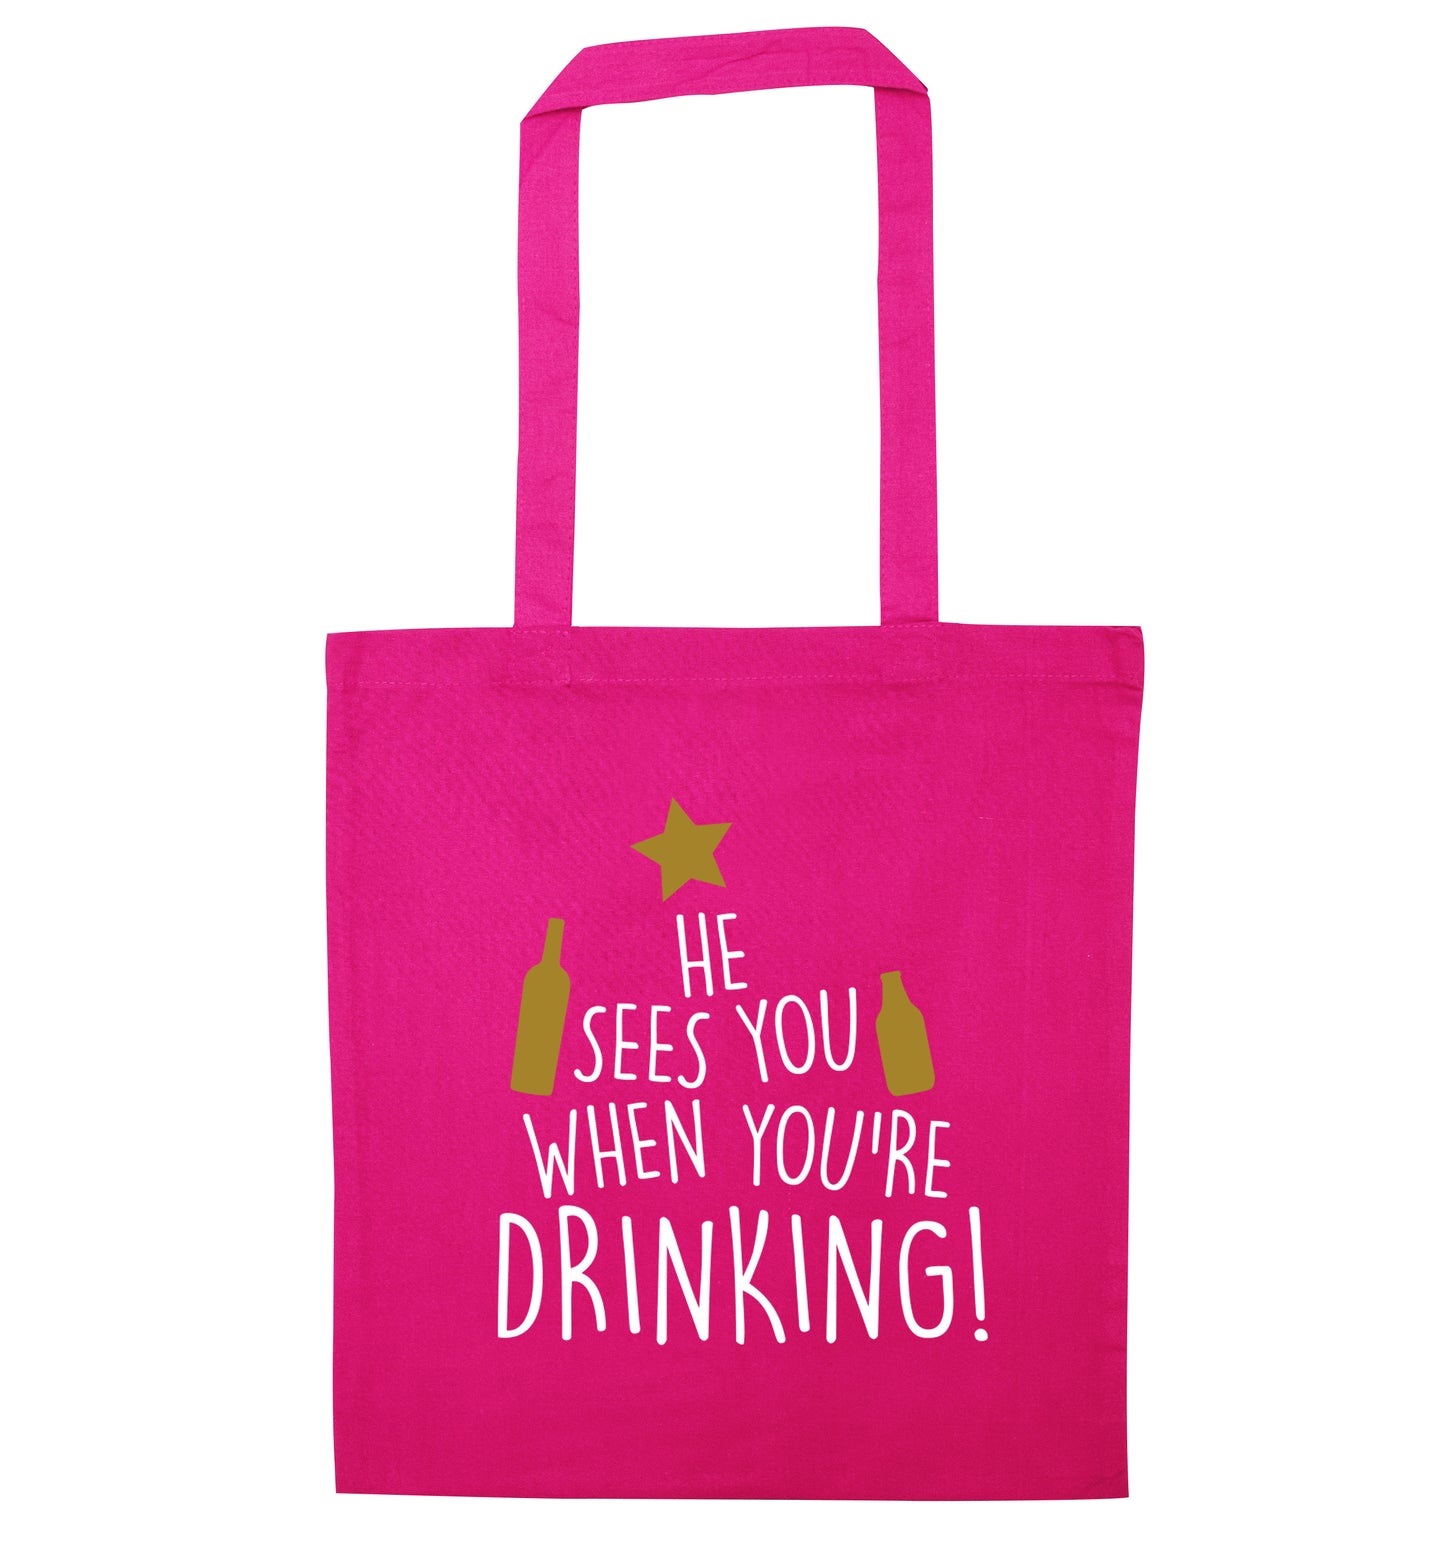 He sees you when you're drinking pink tote bag